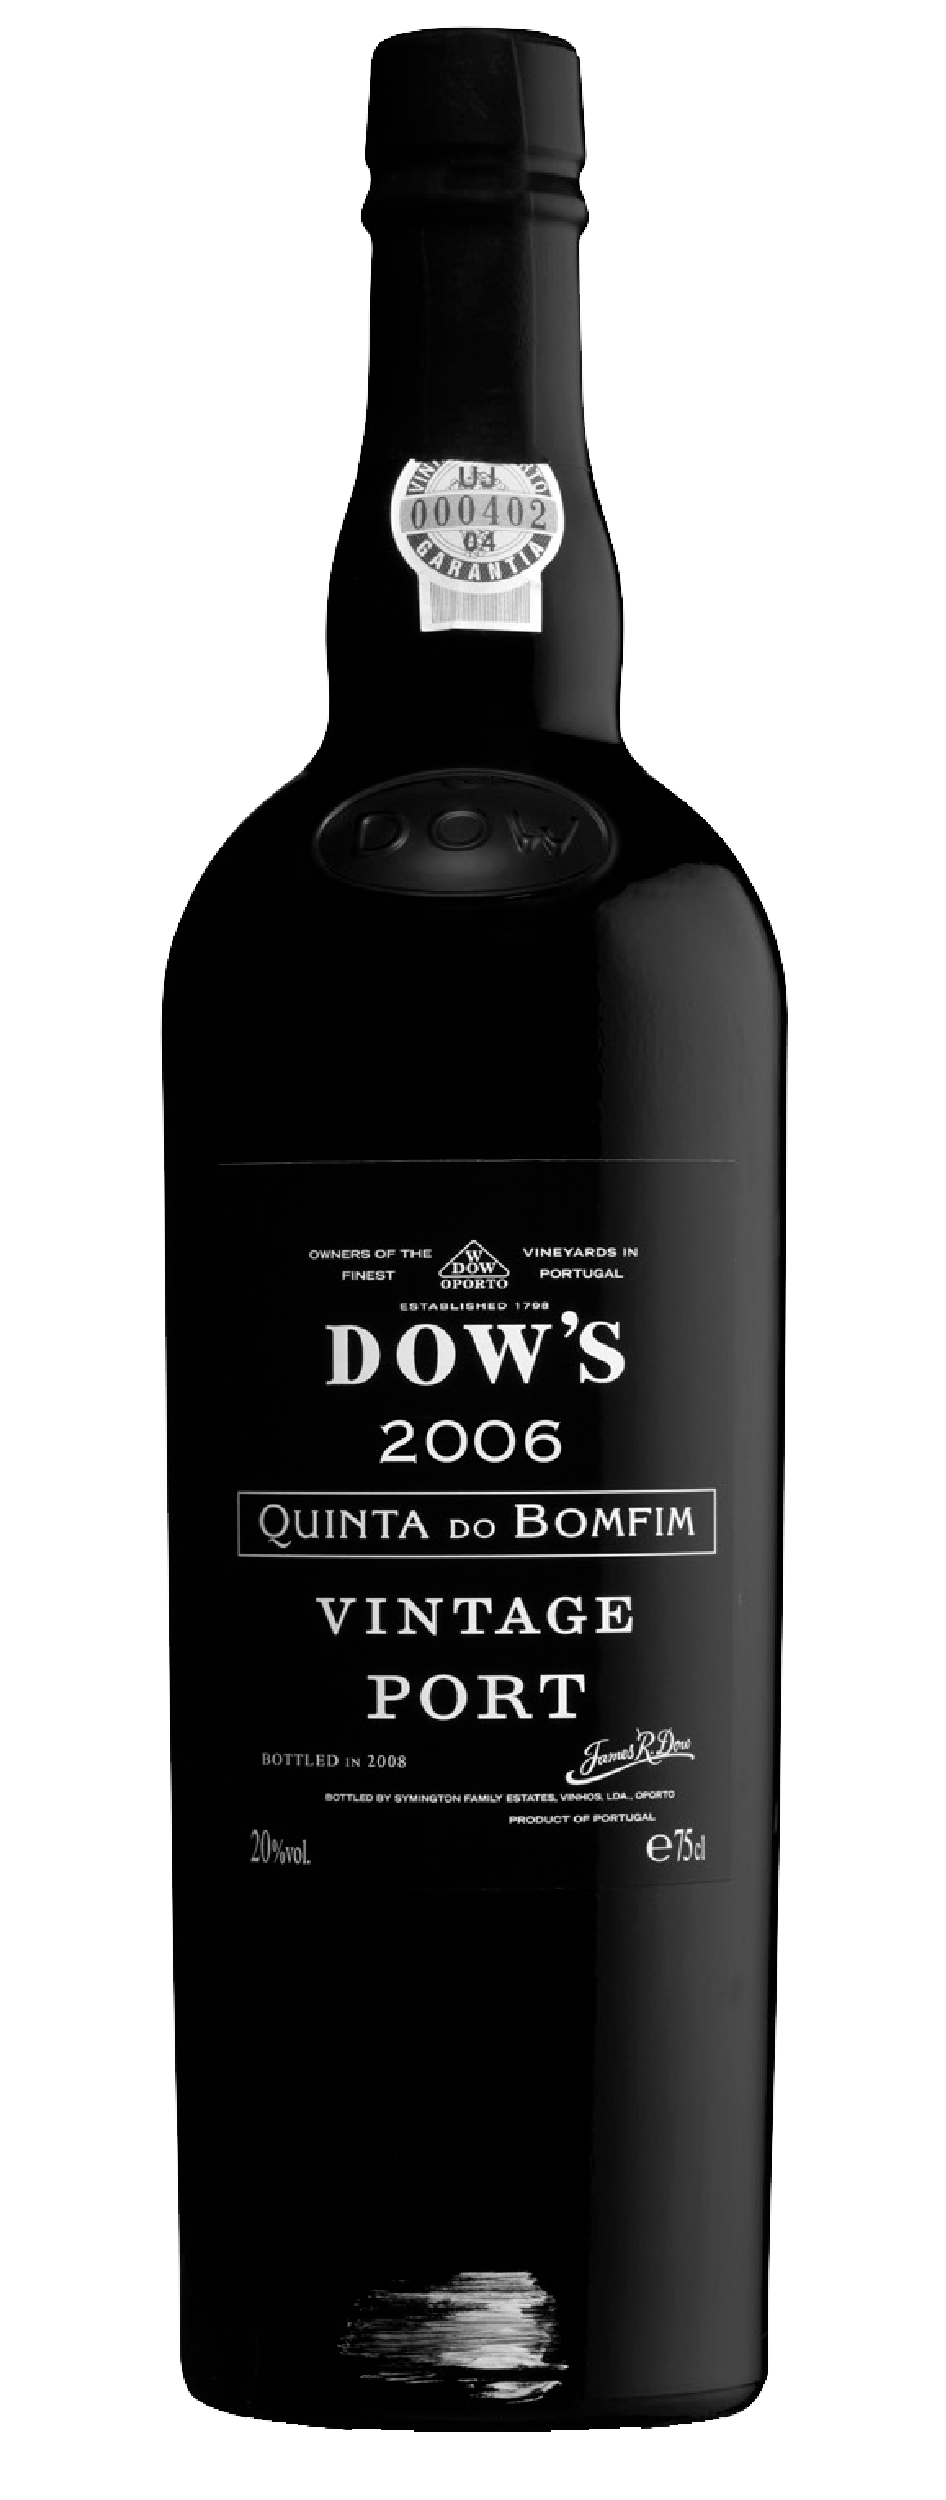 Product Image for DOW'S "QUINTA DO BOMFIM" VINTAGE PORT 2006